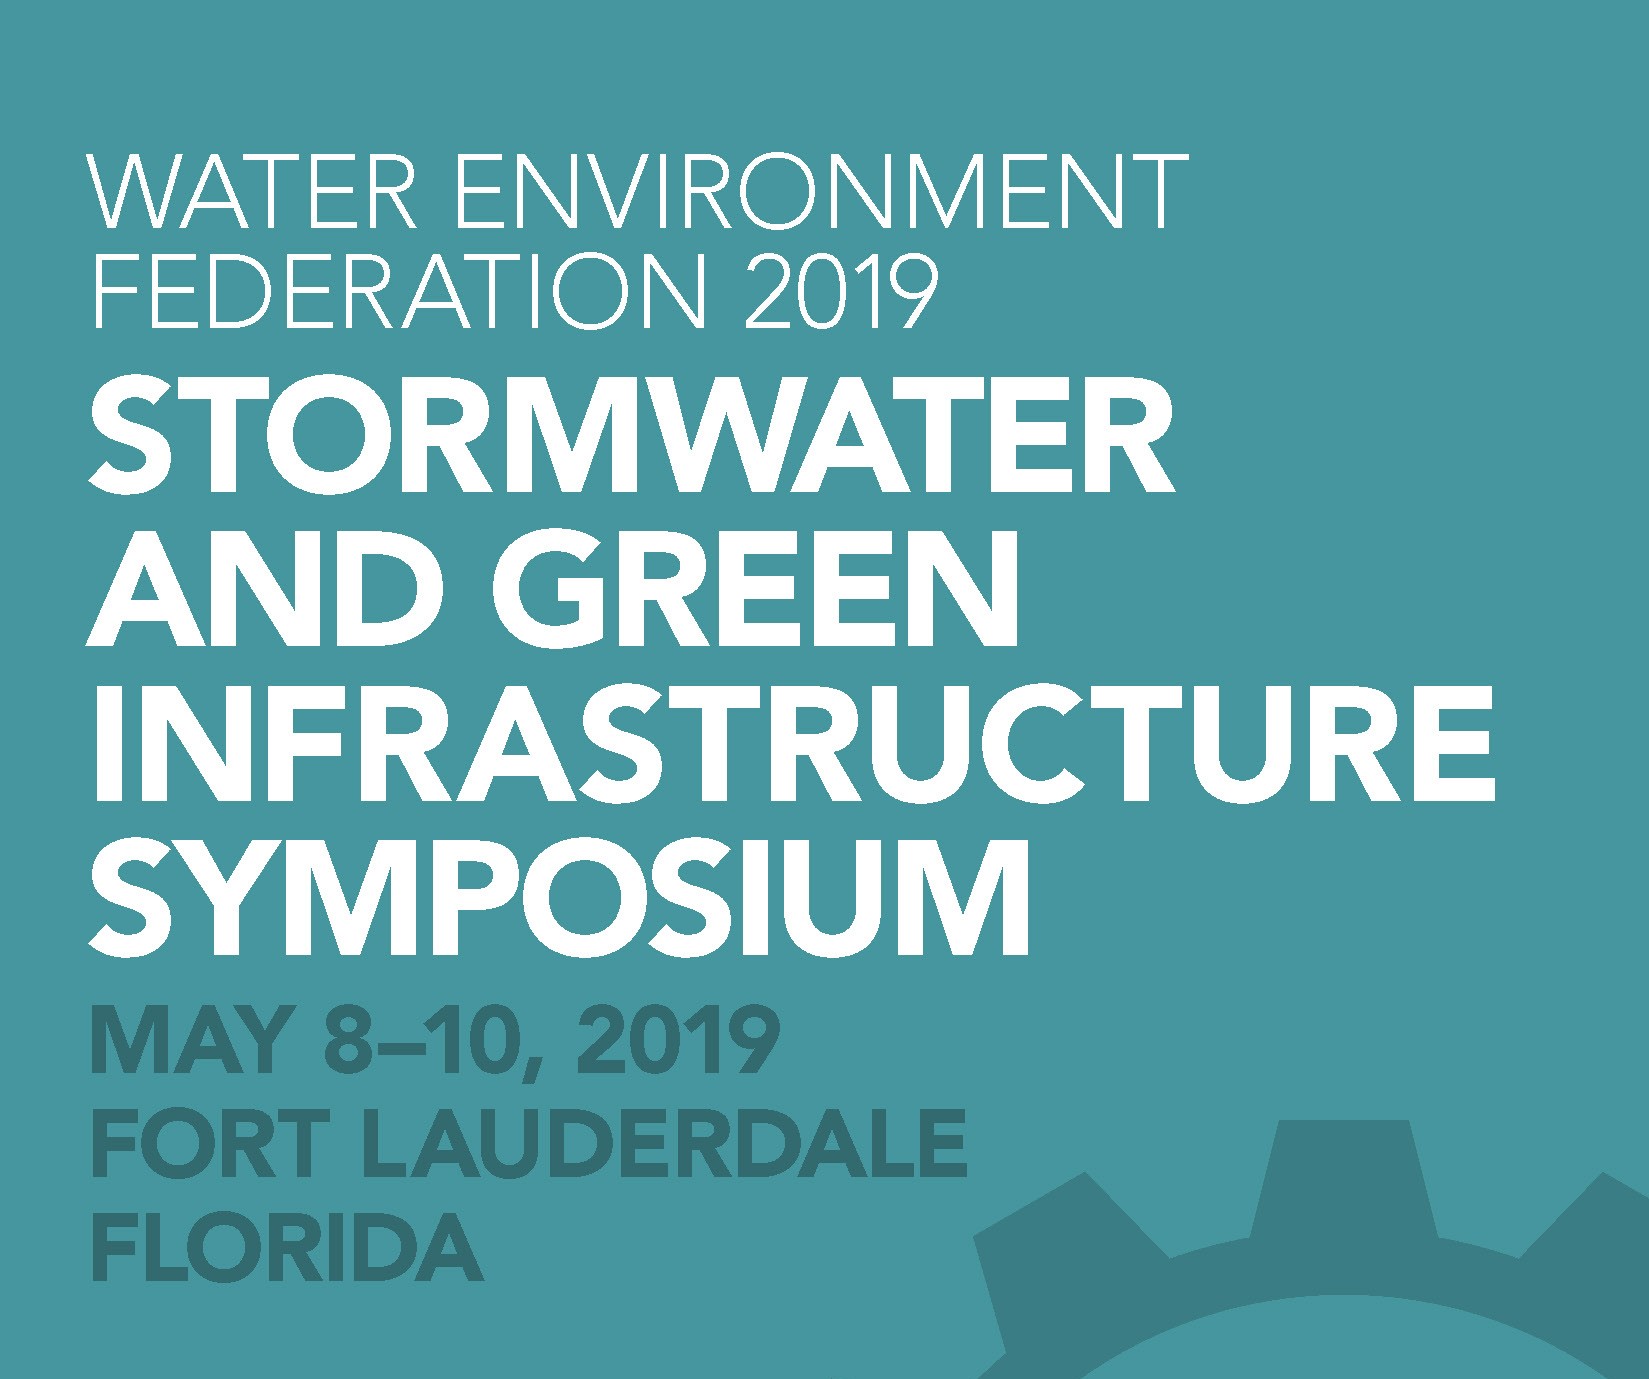 Read up on can’t-miss events at WEF’s inaugural Stormwater and Green Infrastructure Symposium